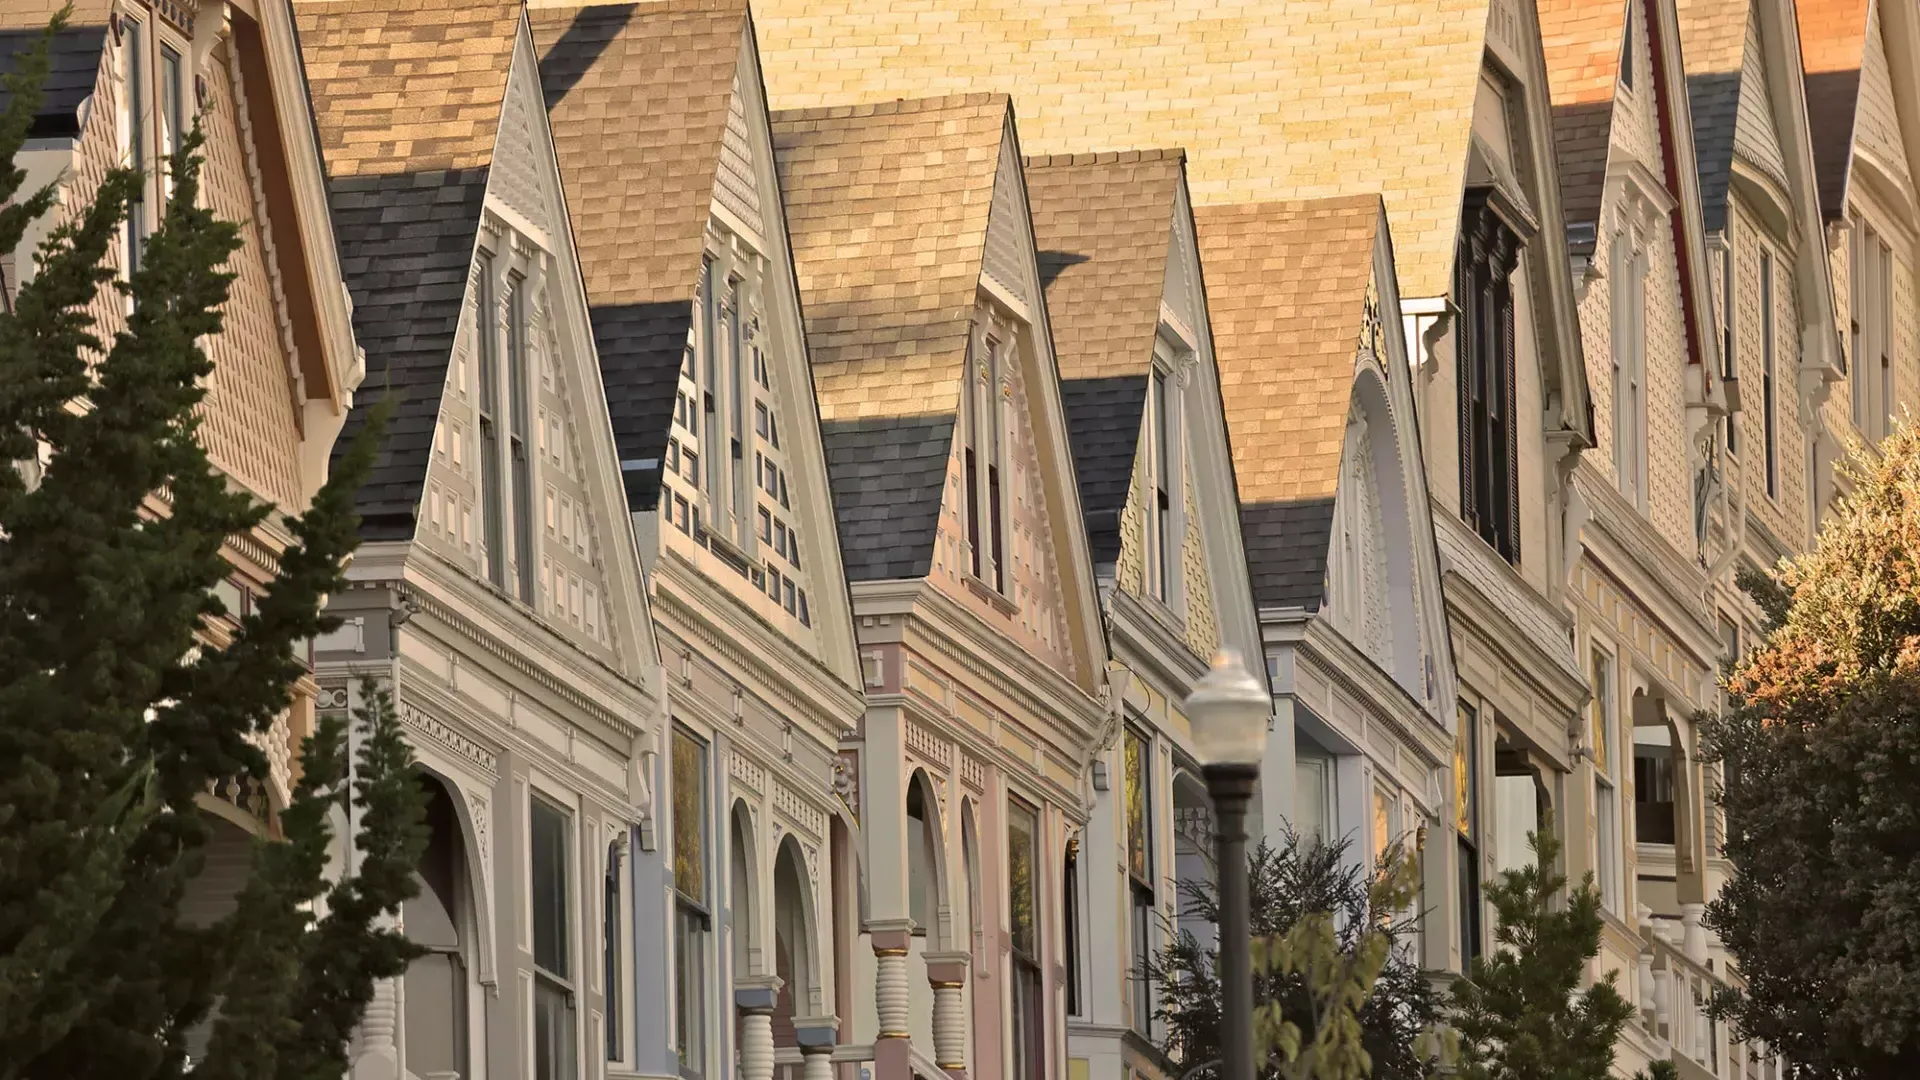 Close up of a row of Victorian houses in the Castro district of San Francisco.